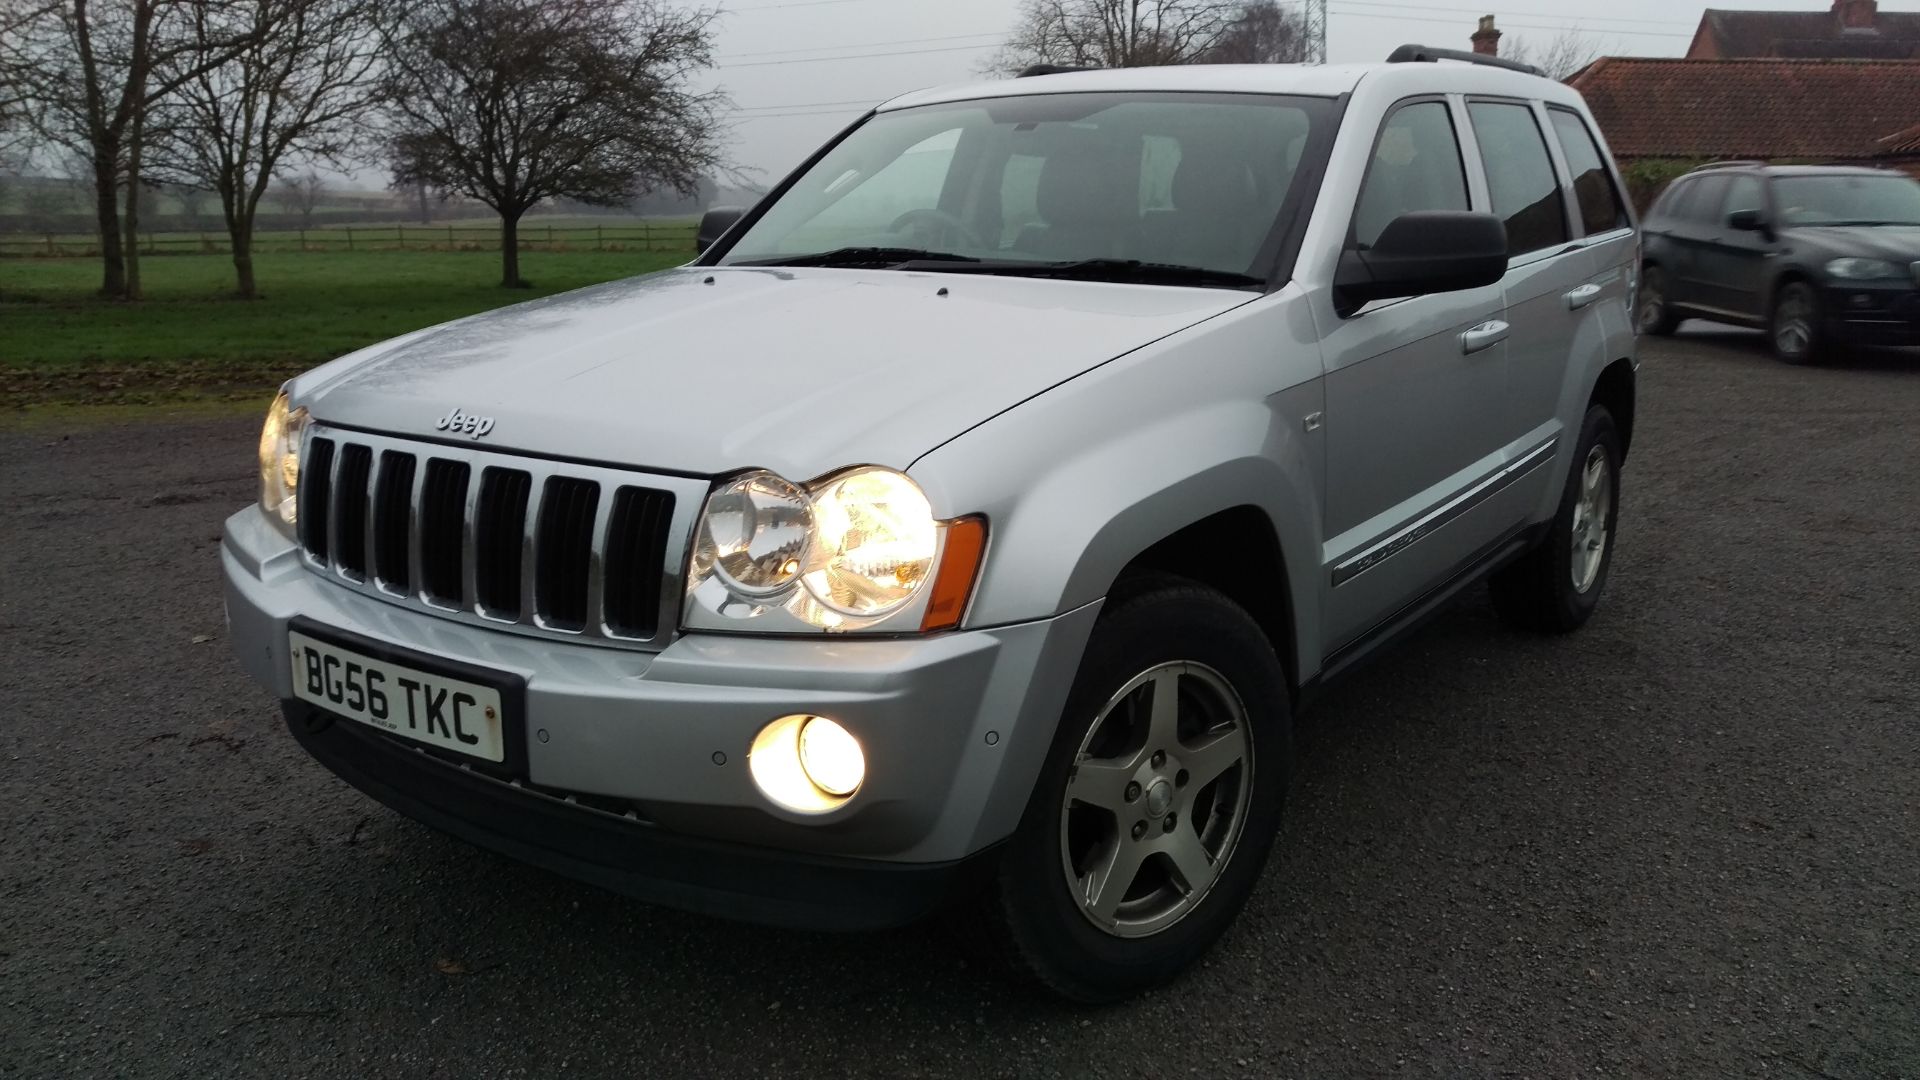 2006/56 PLATE JEEP GRAND CHEROKEE 3.0 CRD V6 TURBO DIESEL AUTO. ONLY 92K MILES. 12 MONTHS MOT - Image 10 of 32